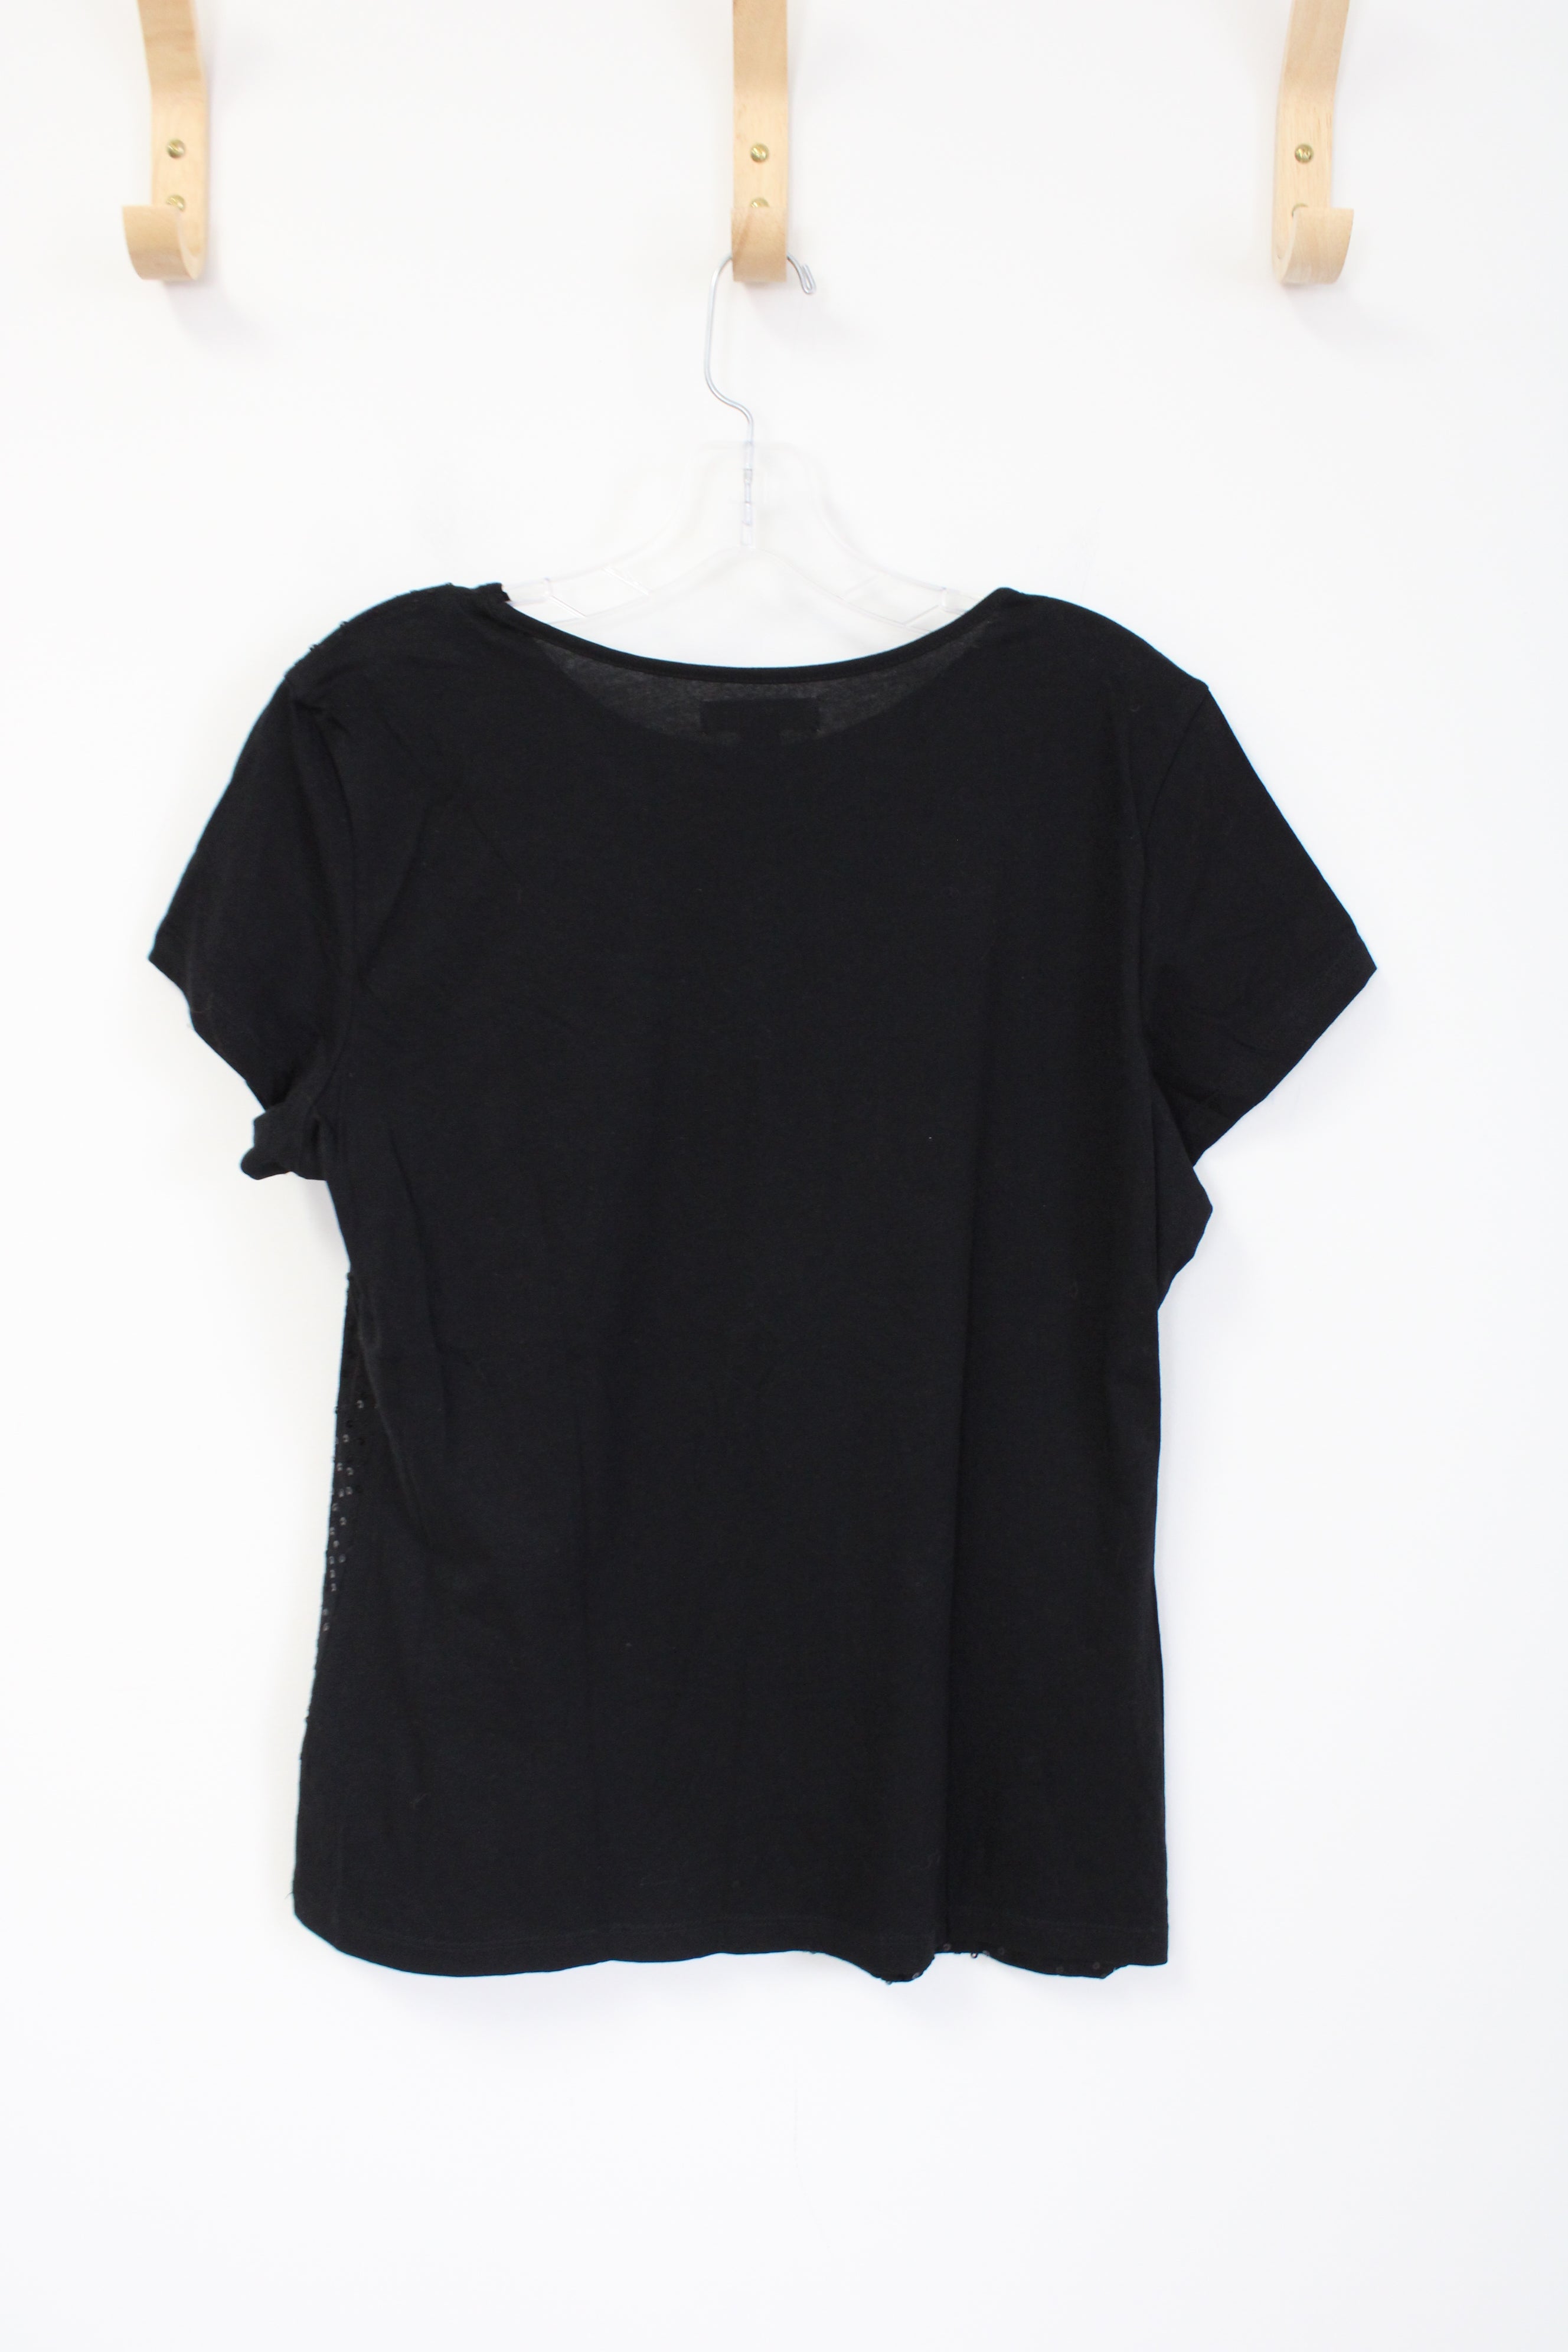 Chaps Black Sequined Tee | L